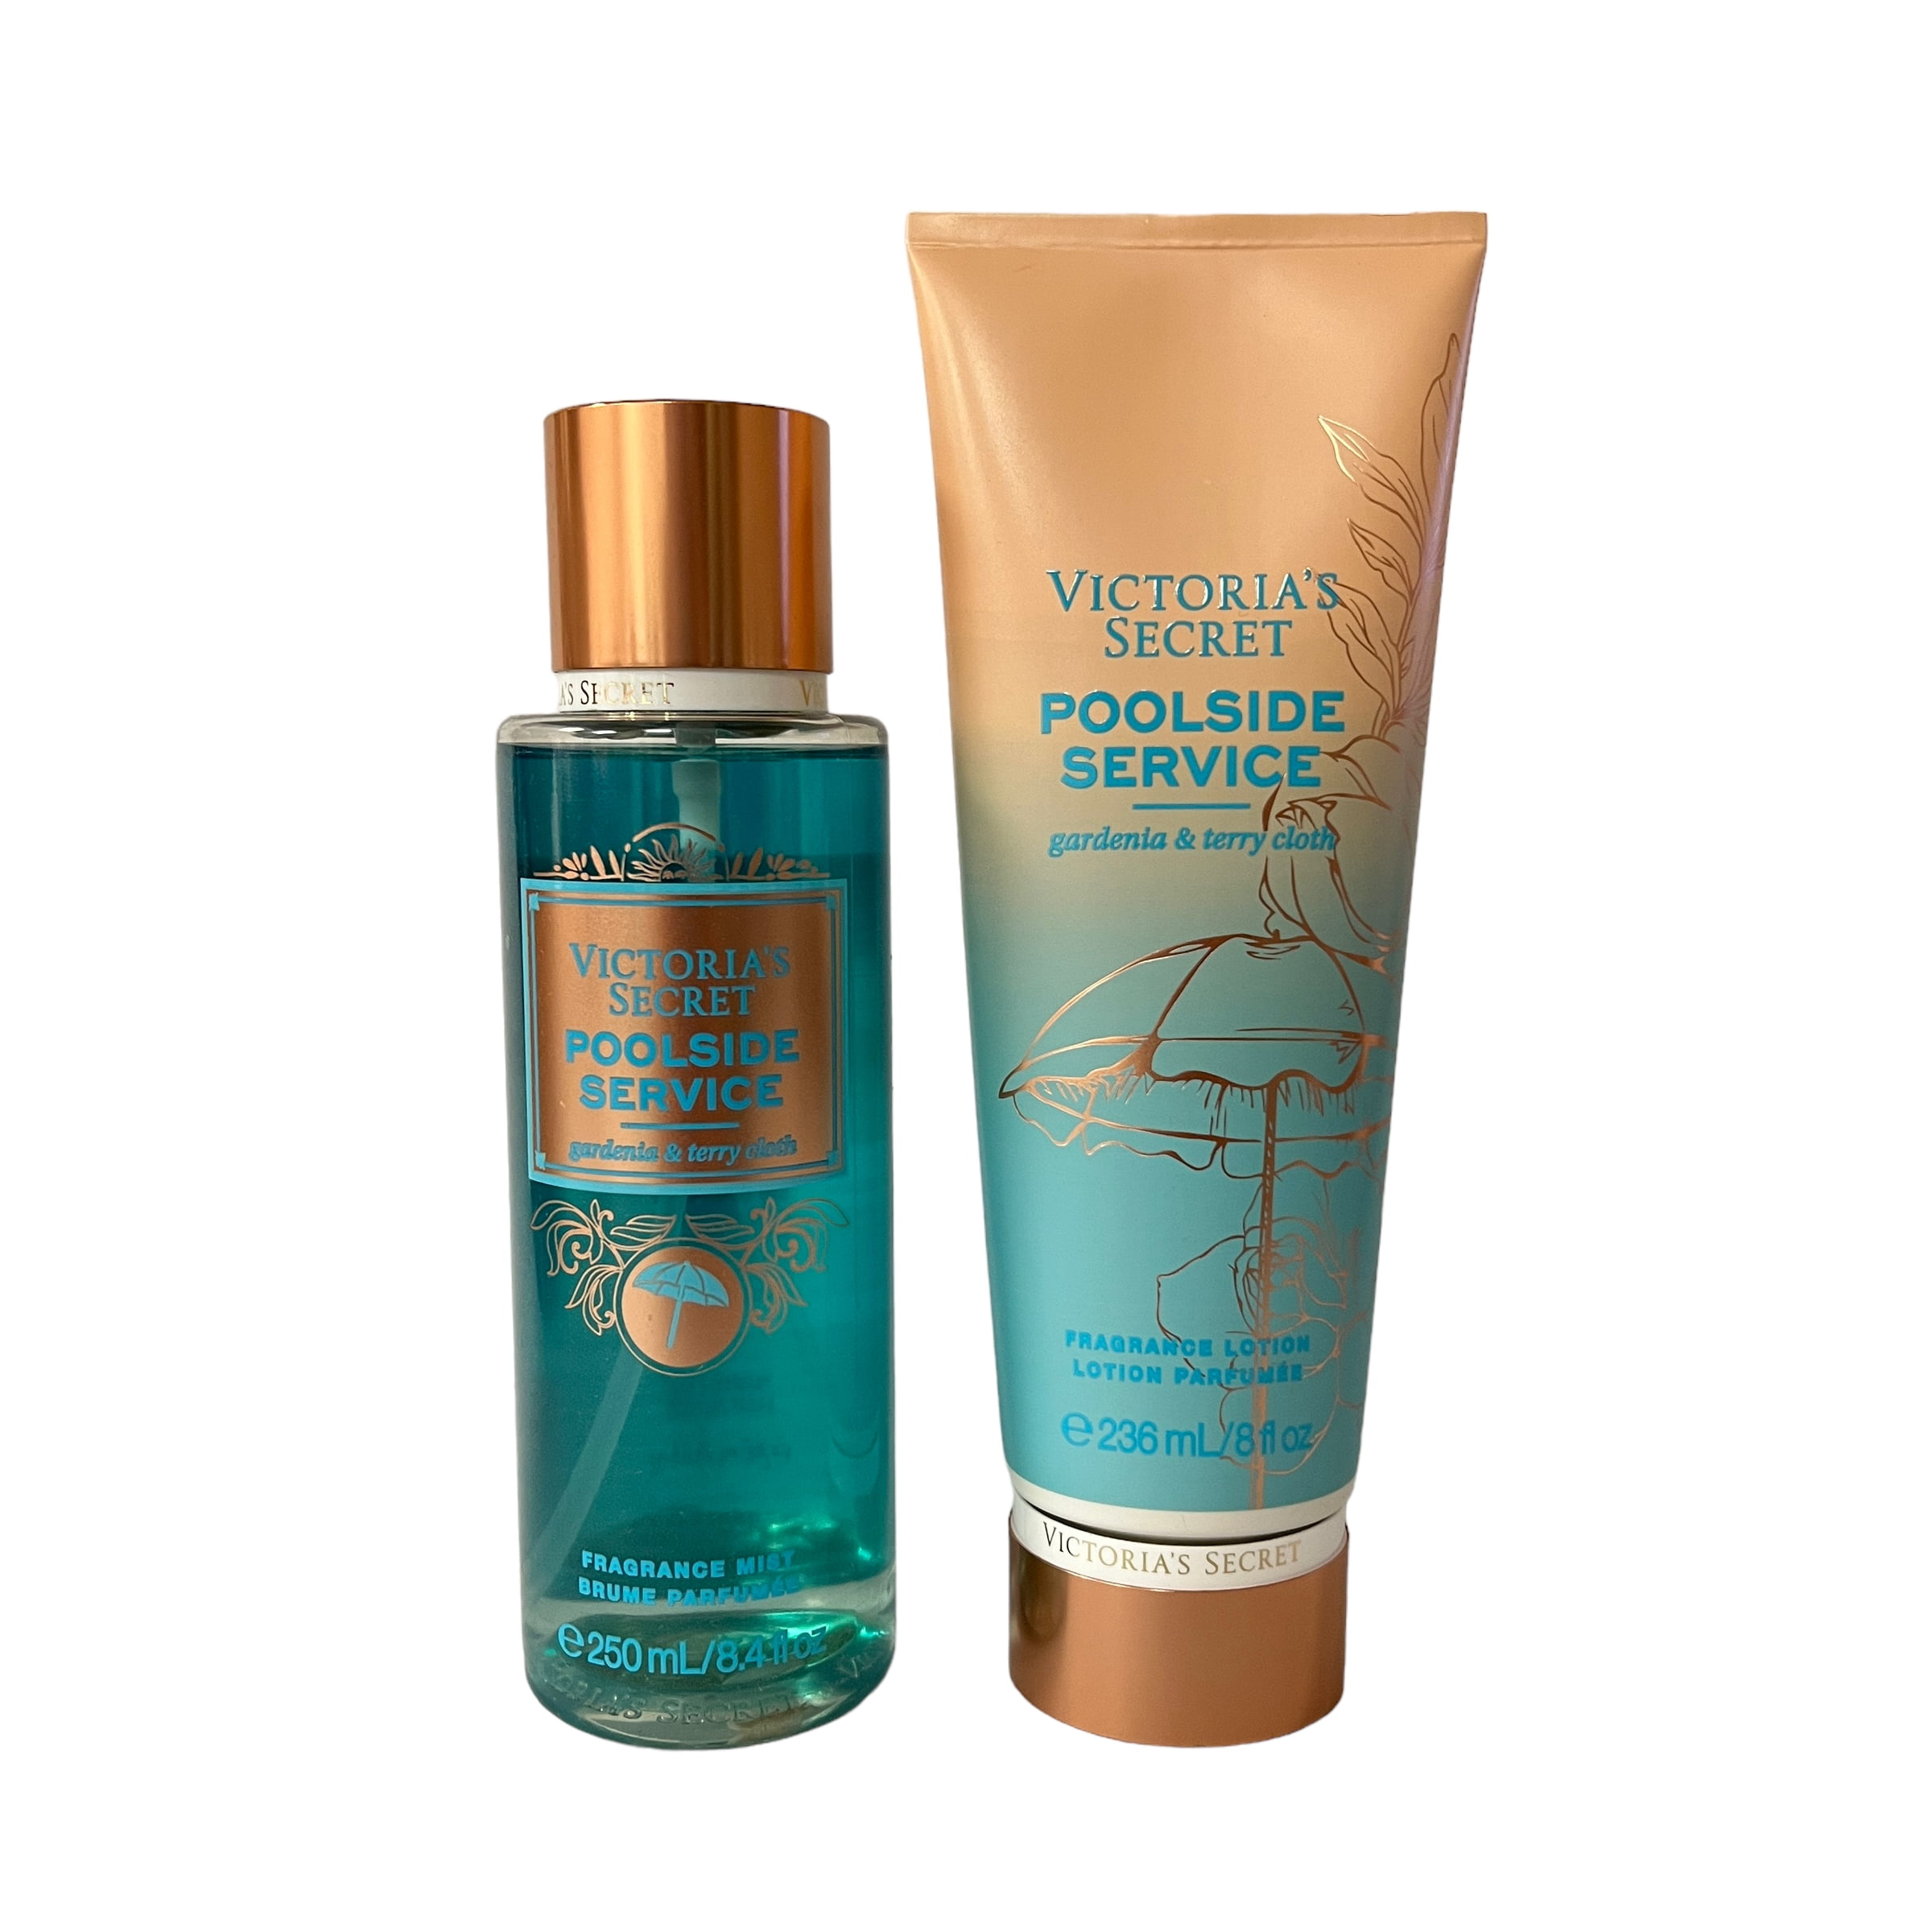 Victoria's Secret Amber Romance Body Lotion, Mists & Lotions 5 For $30